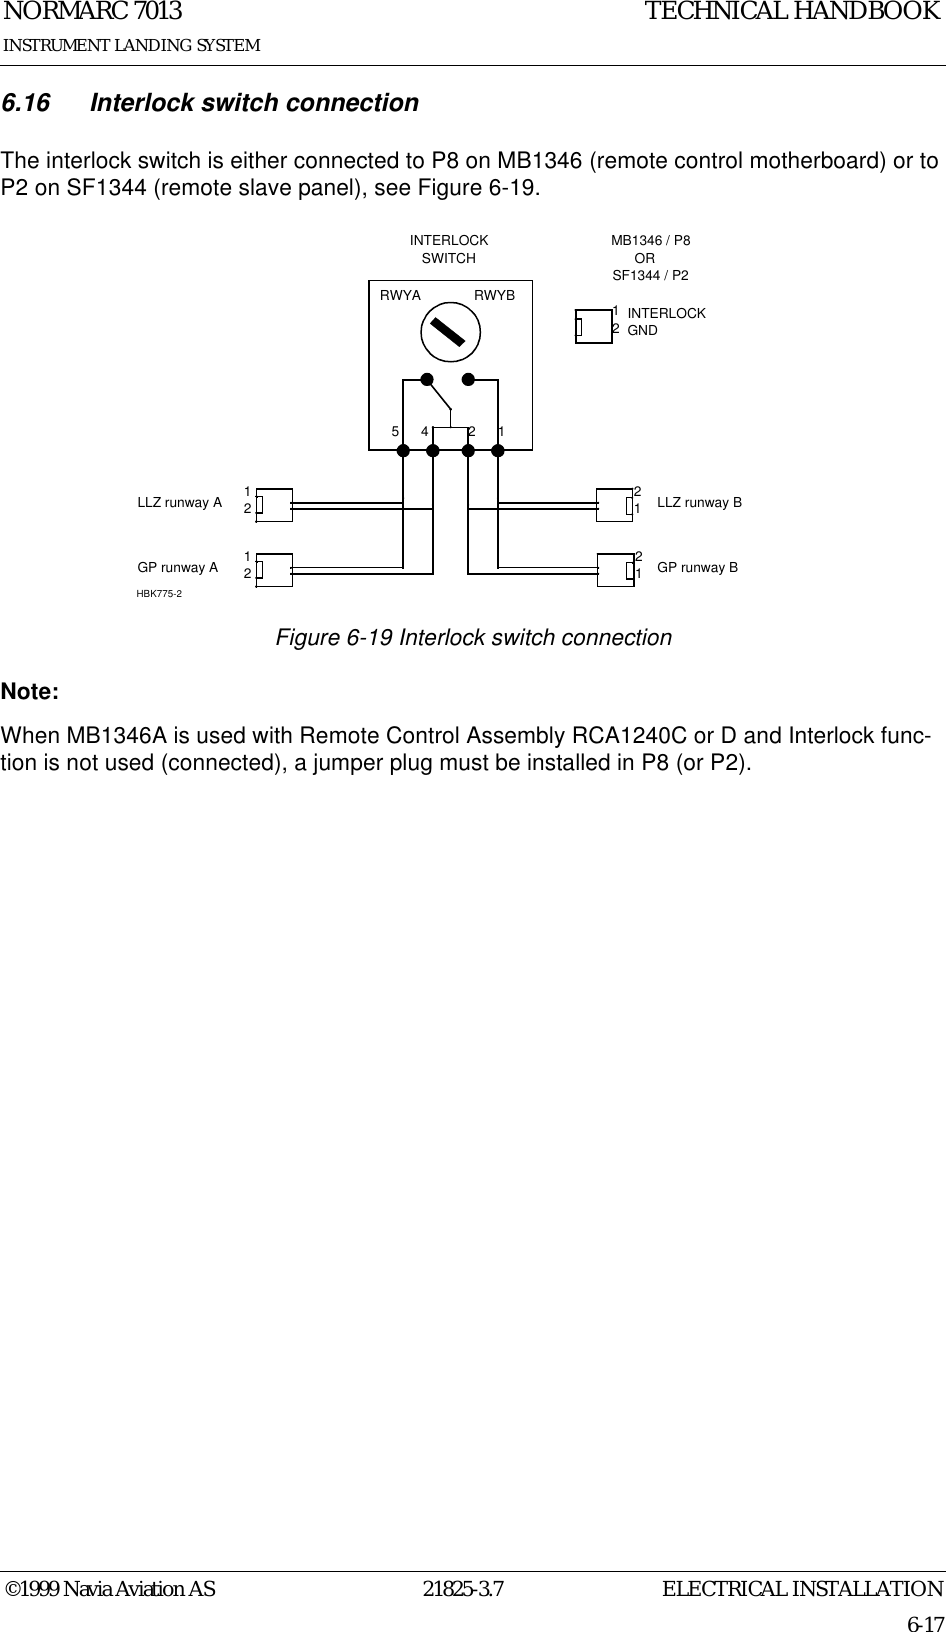 ELECTRICAL INSTALLATIONNORMARC 701321825-3.76-17©1999 Navia Aviation ASINSTRUMENT LANDING SYSTEMTECHNICAL HANDBOOK6.16 Interlock switch connectionThe interlock switch is either connected to P8 on MB1346 (remote control motherboard) or to P2 on SF1344 (remote slave panel), see Figure 6-19.Figure 6-19 Interlock switch connectionNote:When MB1346A is used with Remote Control Assembly RCA1240C or D and Interlock func-tion is not used (connected), a jumper plug must be installed in P8 (or P2).21MB1346 / P8ORSF1344 / P2INTERLOCK SWITCHRWYA RWYB211212INTERLOCKGND1254 21LLZ runway AGP runway ALLZ runway BGP runway BHBK775-2